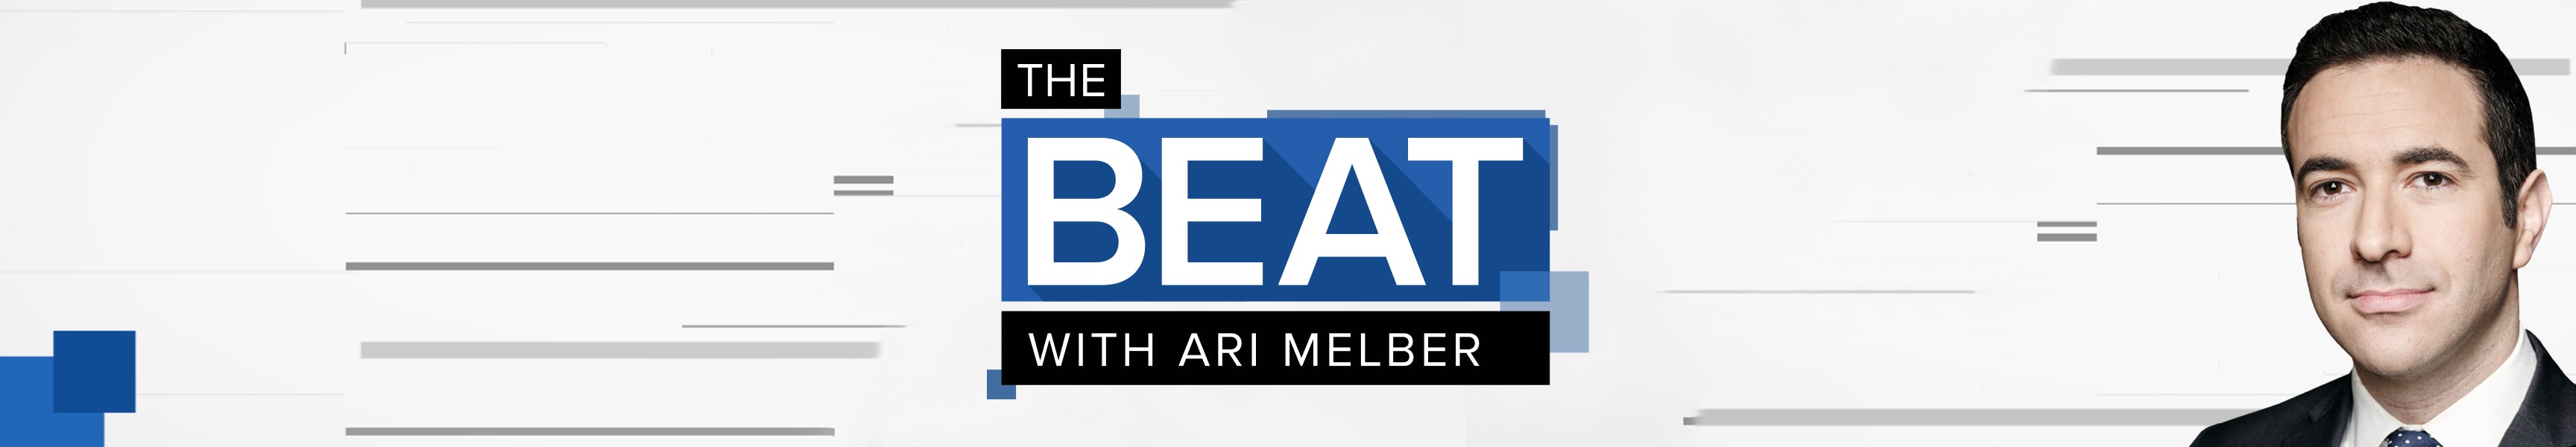 The Beat with Ari Melber 5th Anniversary